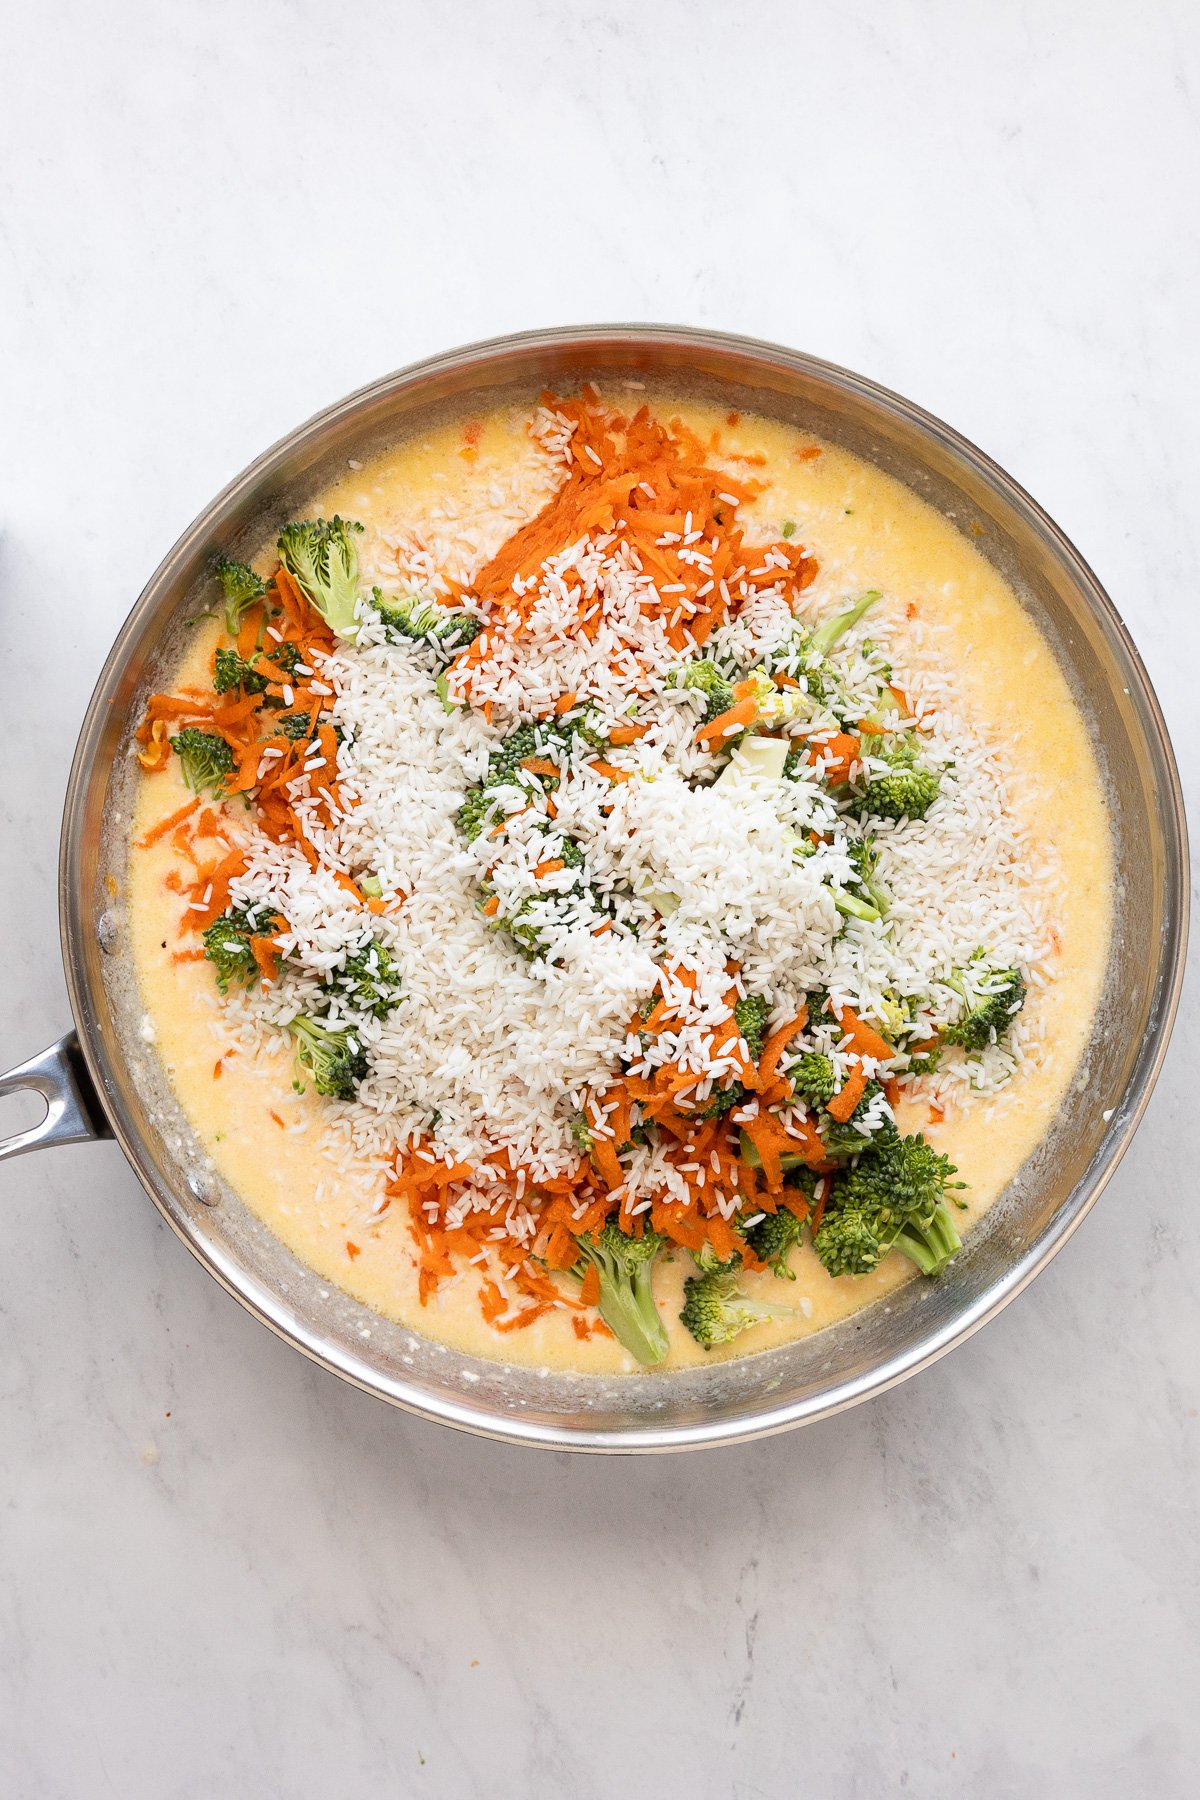 Skillet with cheese sauce and added broccoli, rice, and carrots.